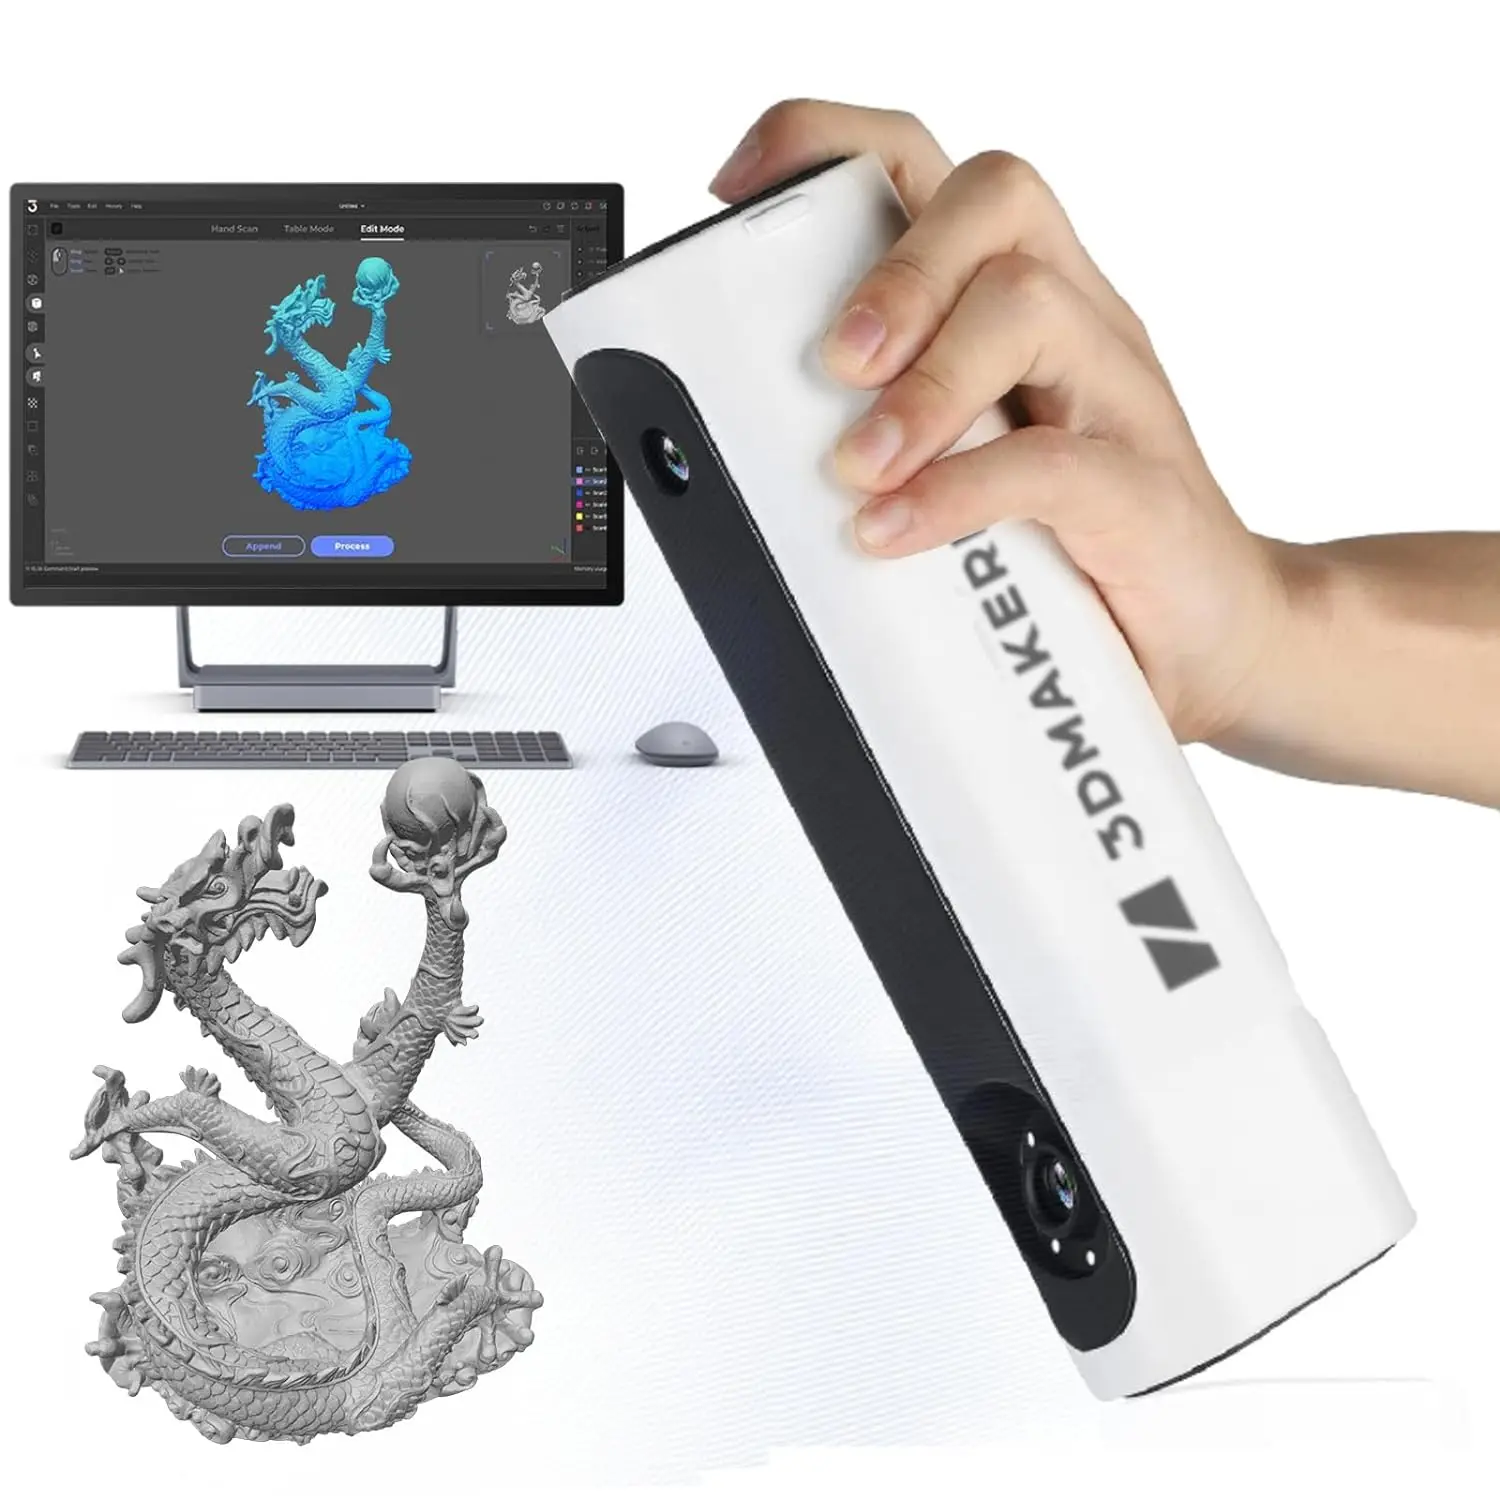 

Lynx 3D Scanner for 3D Printing with 0.1mm Accuracy, 10FPS Scanning Lightning-Fast Speed with Anti-Shake Lenses, Premium Kit